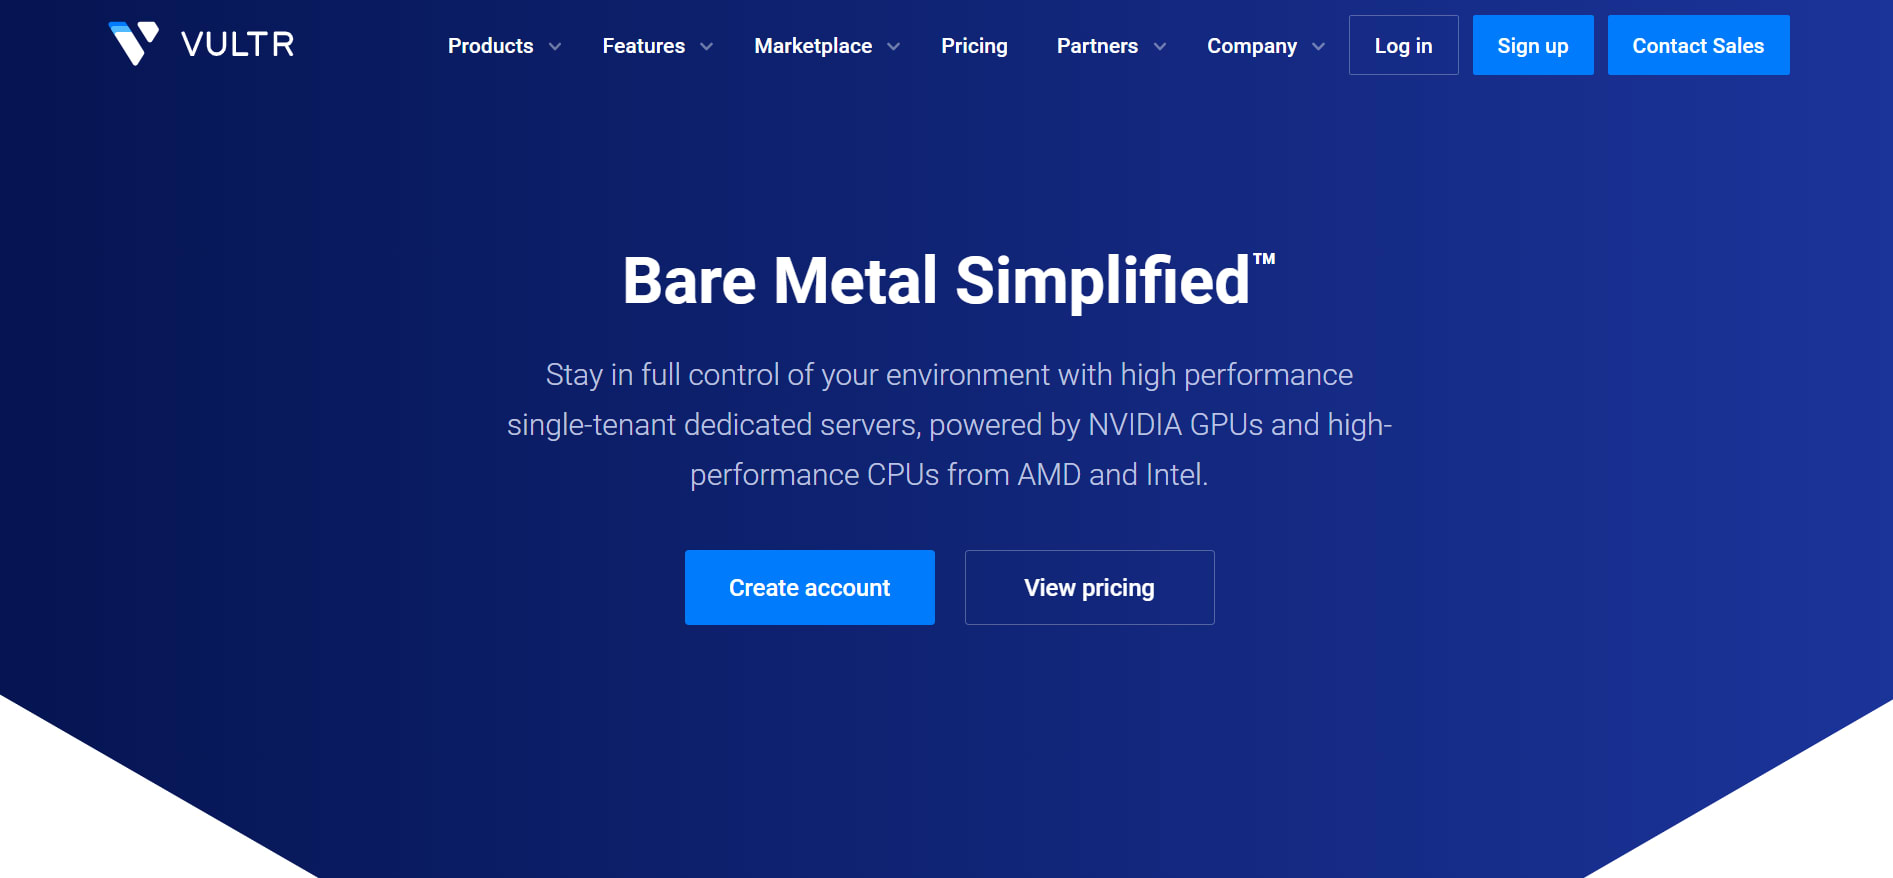 Vultr provides bare metal servers with a super-fast network.